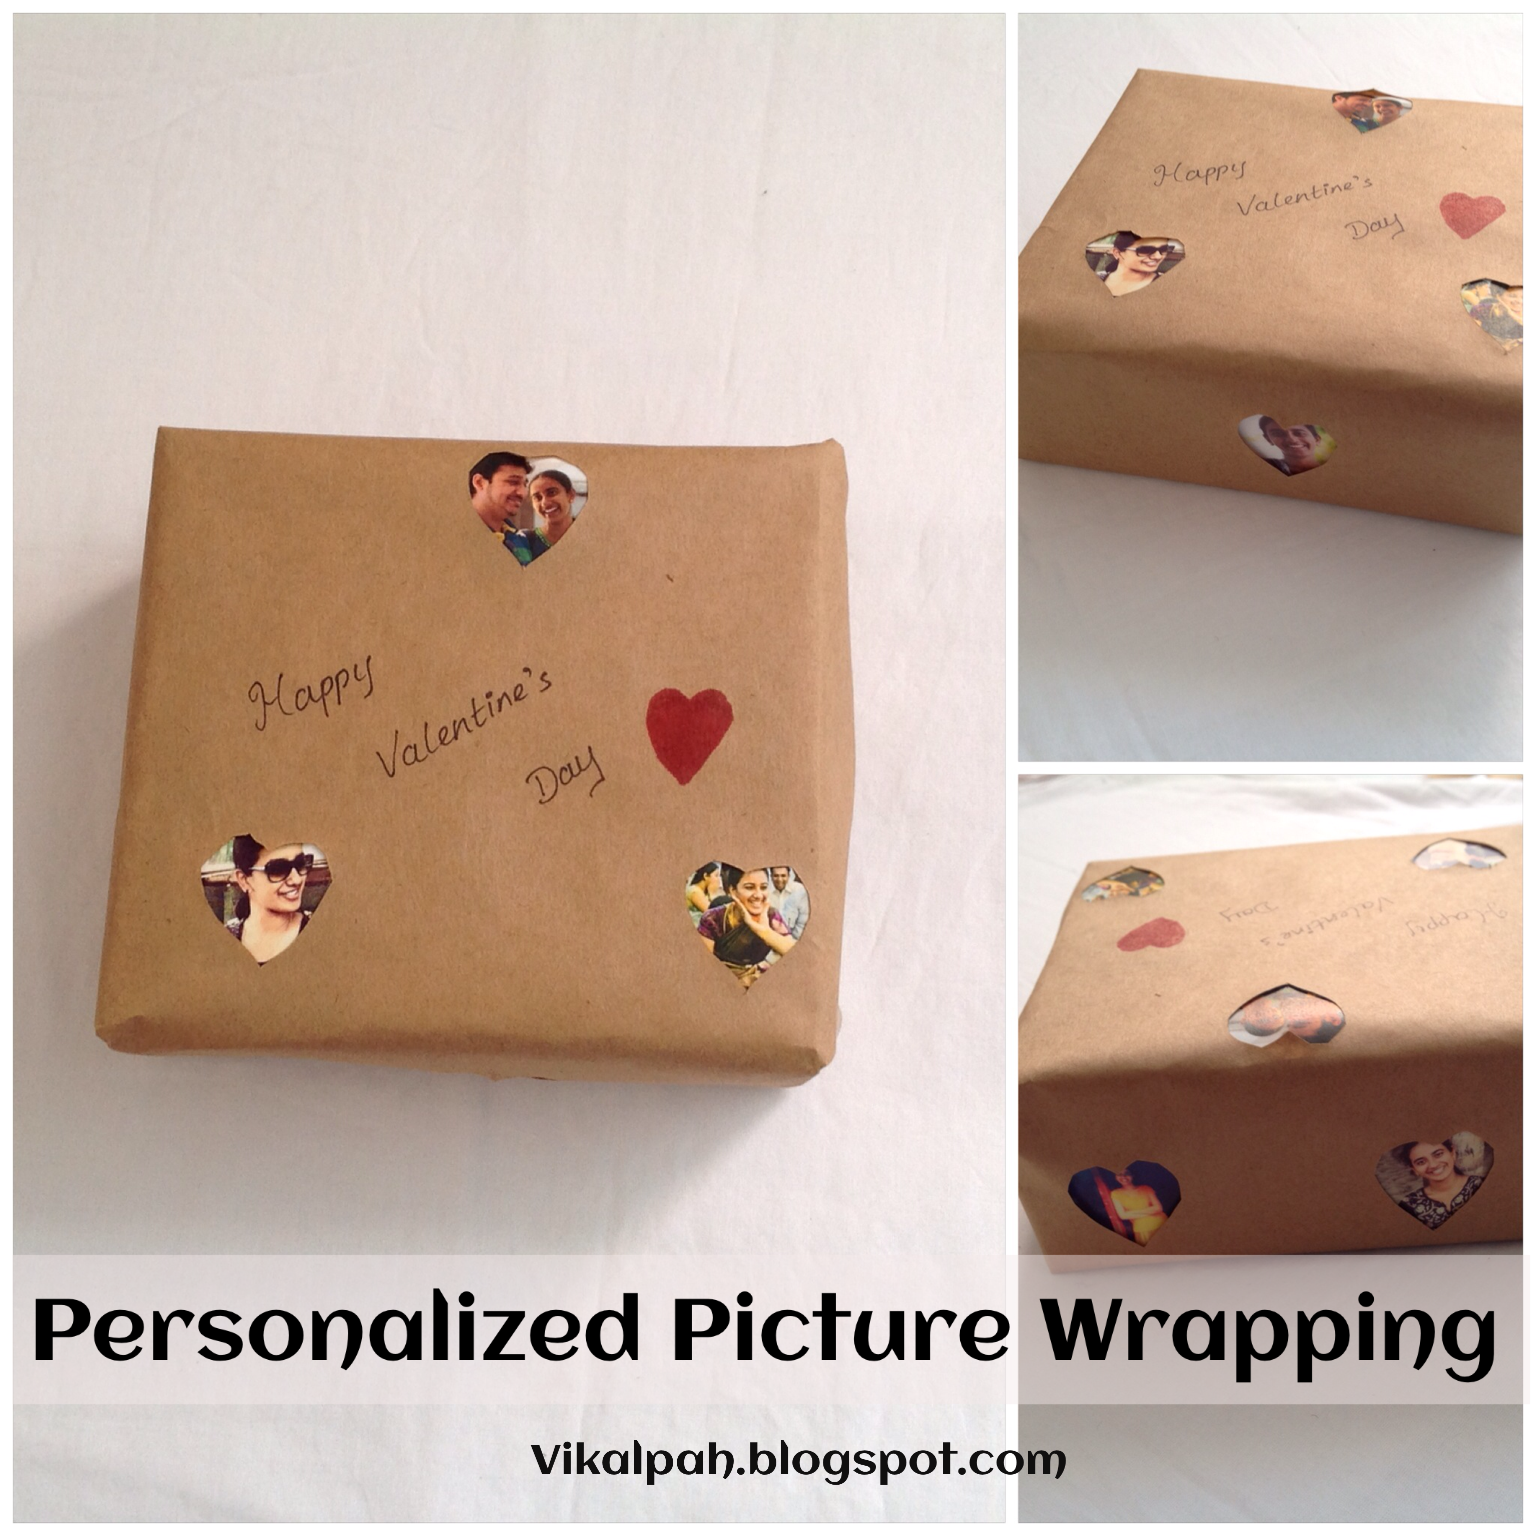   Personalized picture wrapping